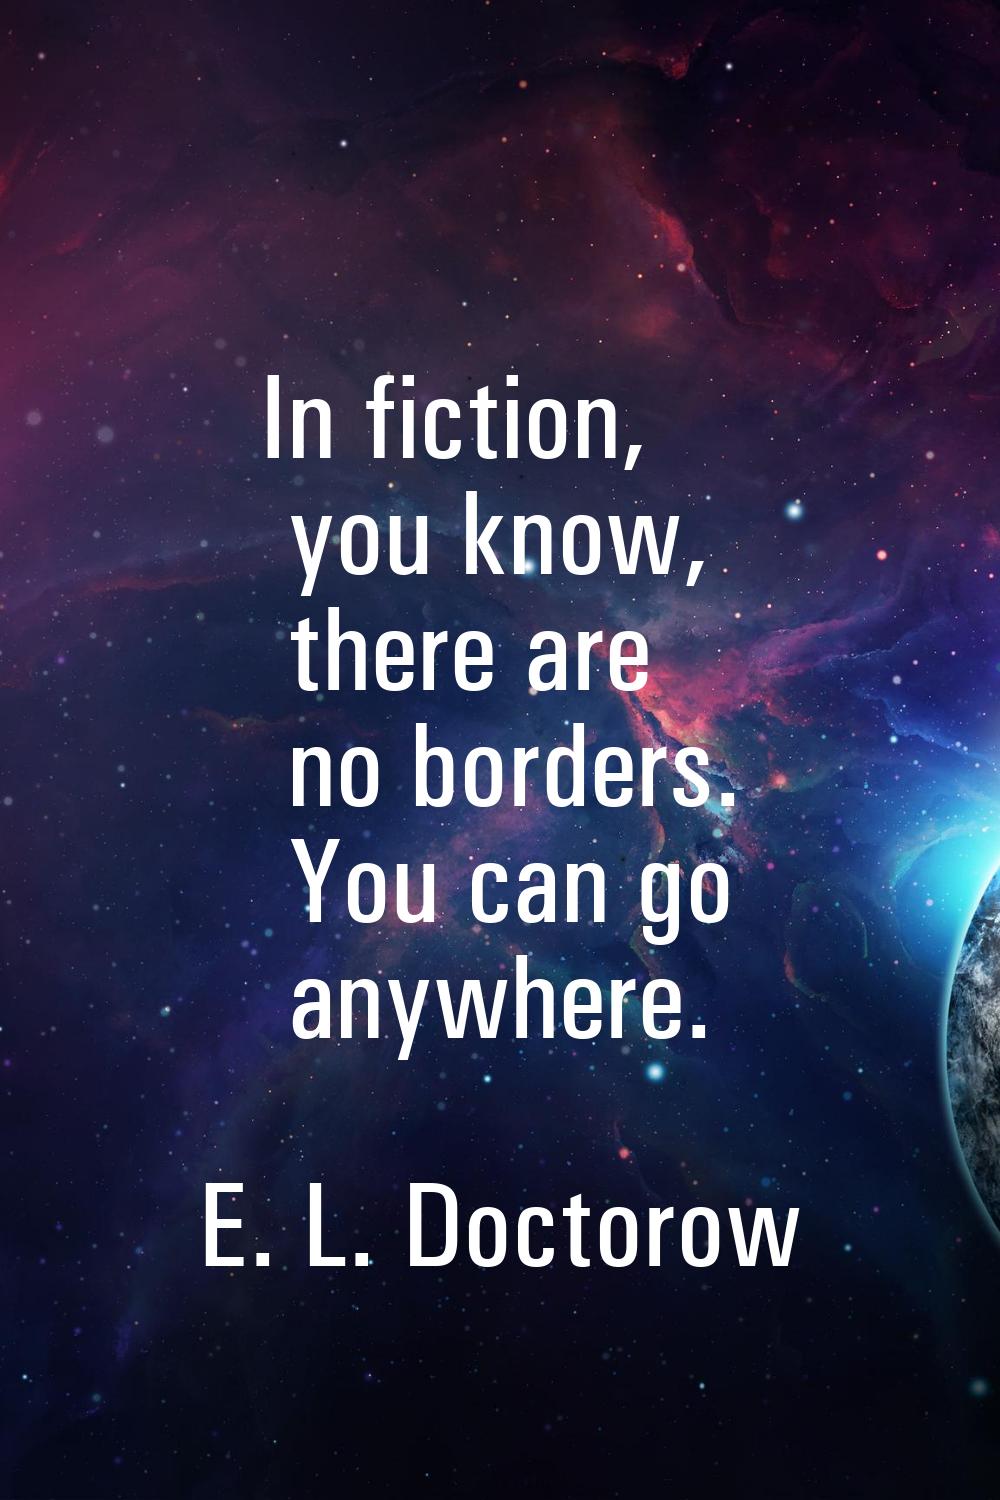 In fiction, you know, there are no borders. You can go anywhere.